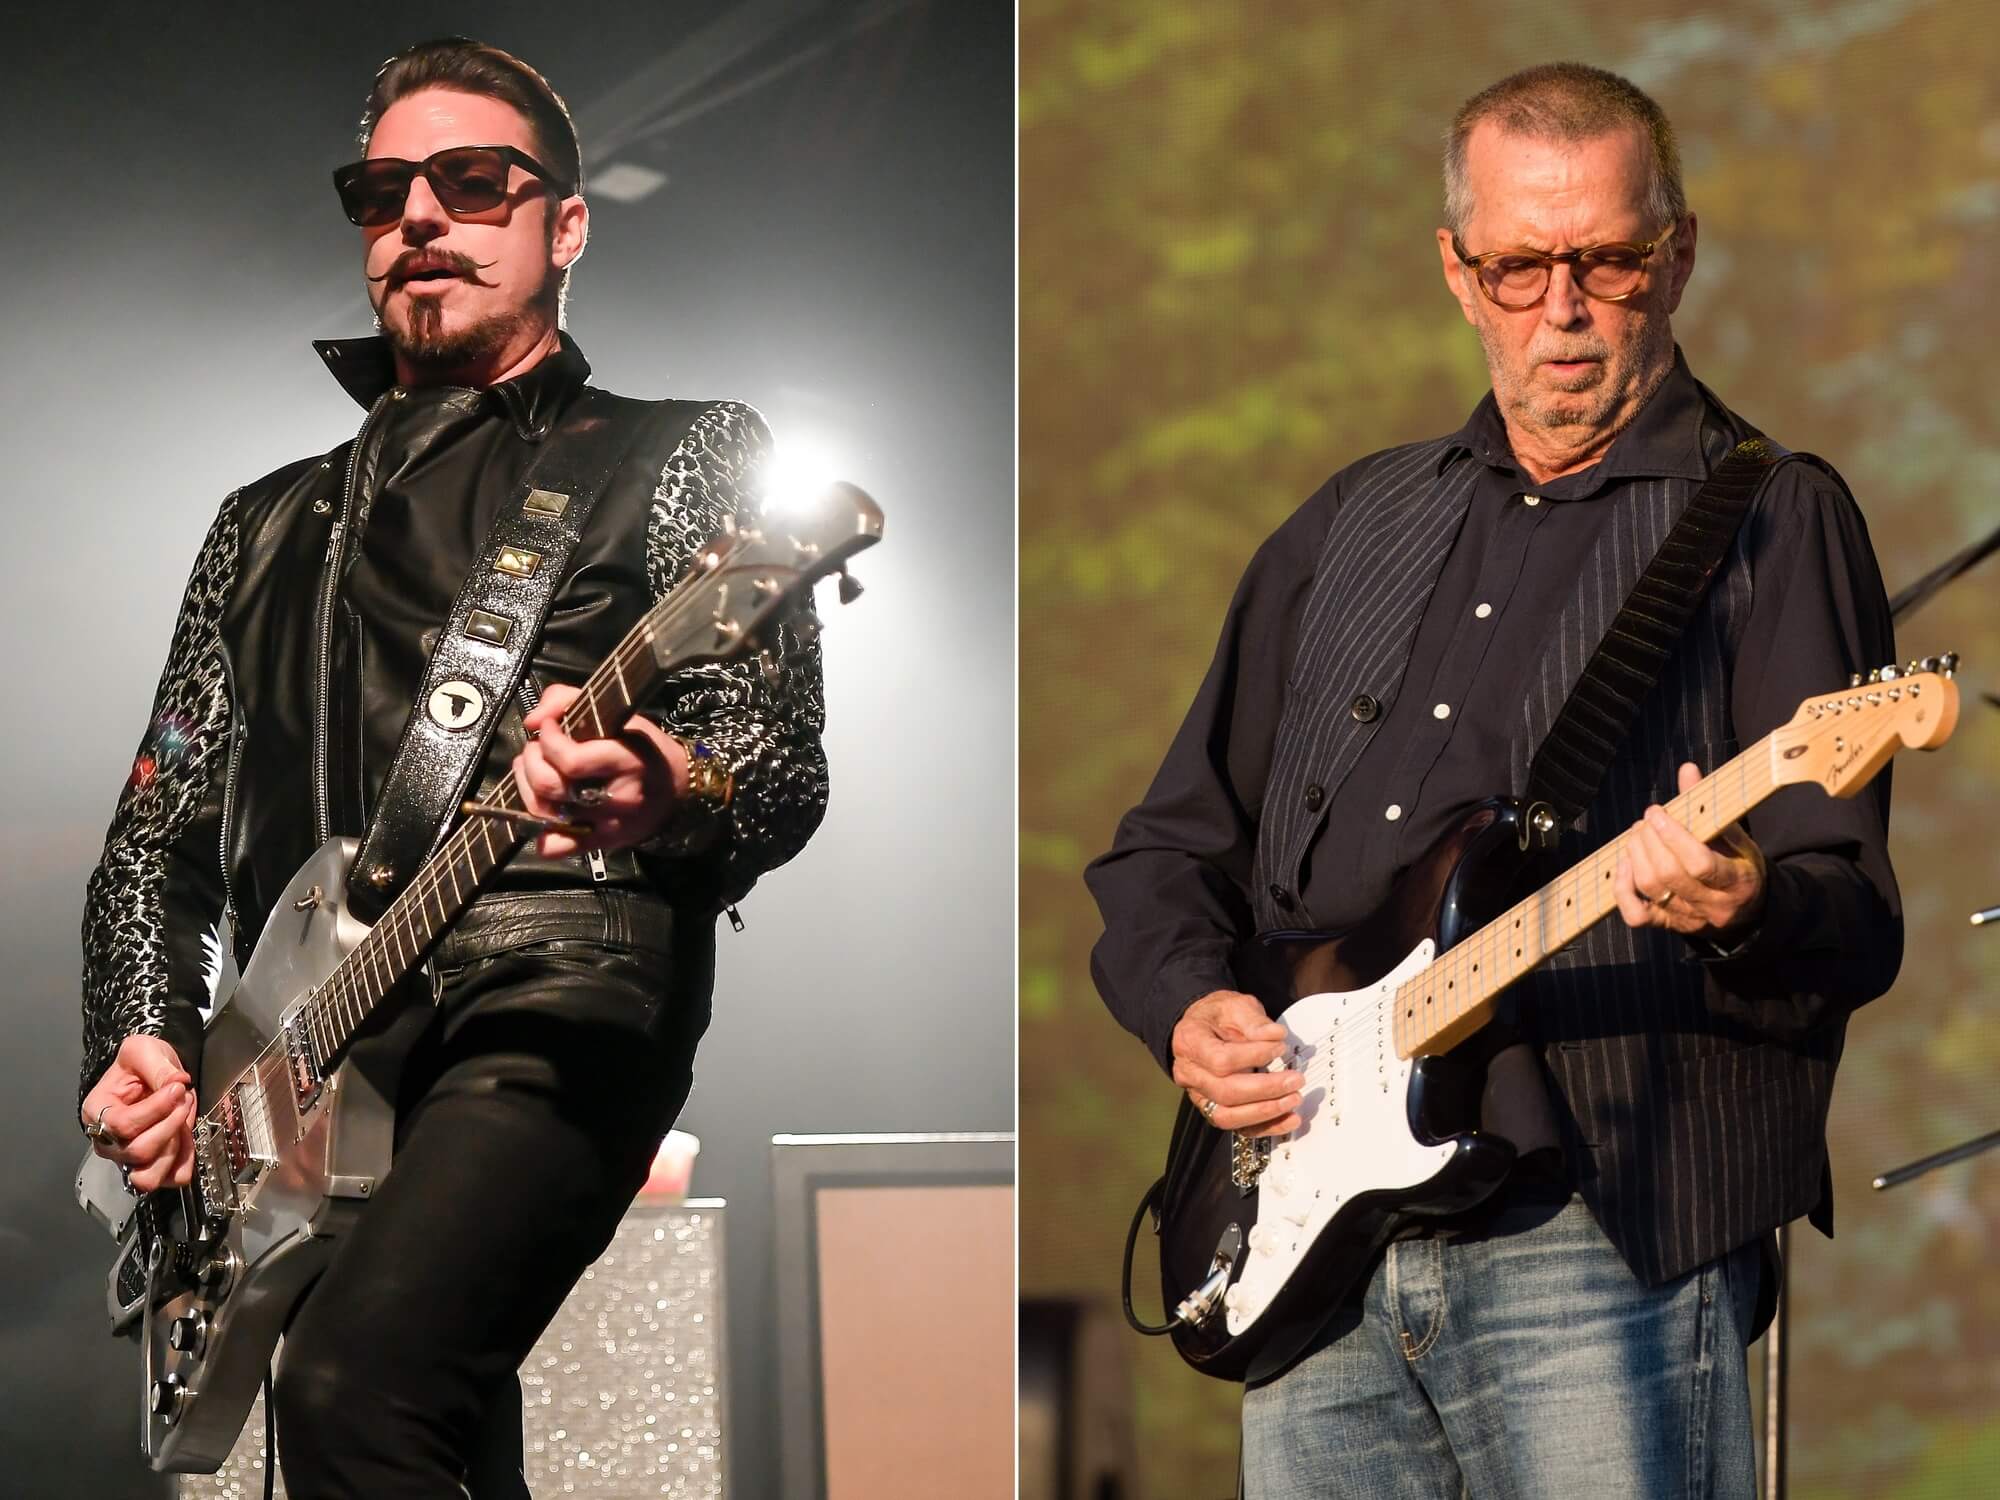 Scott Holiday of Rival Sons and Eric Clapton